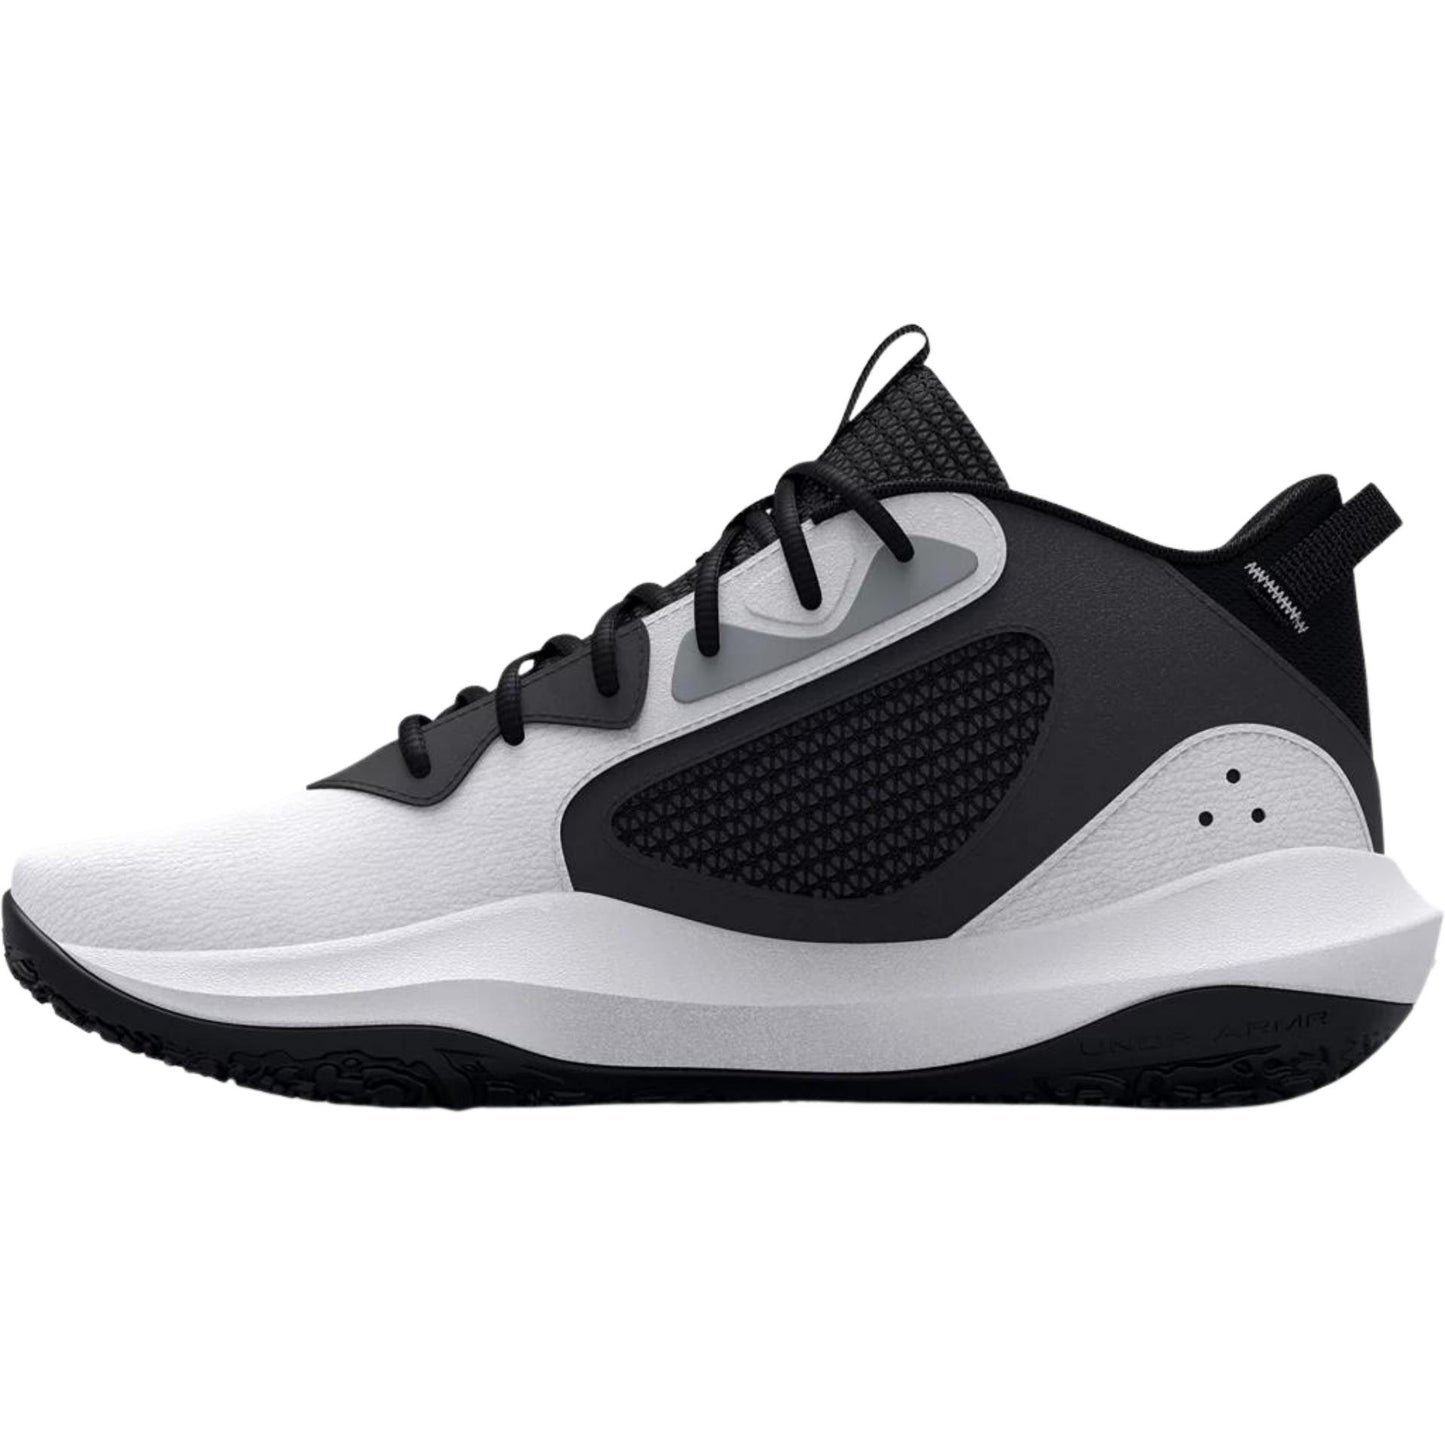 Under Armour Adult UA Lockdown 6 Basketball Shoes - White/Jet Gray